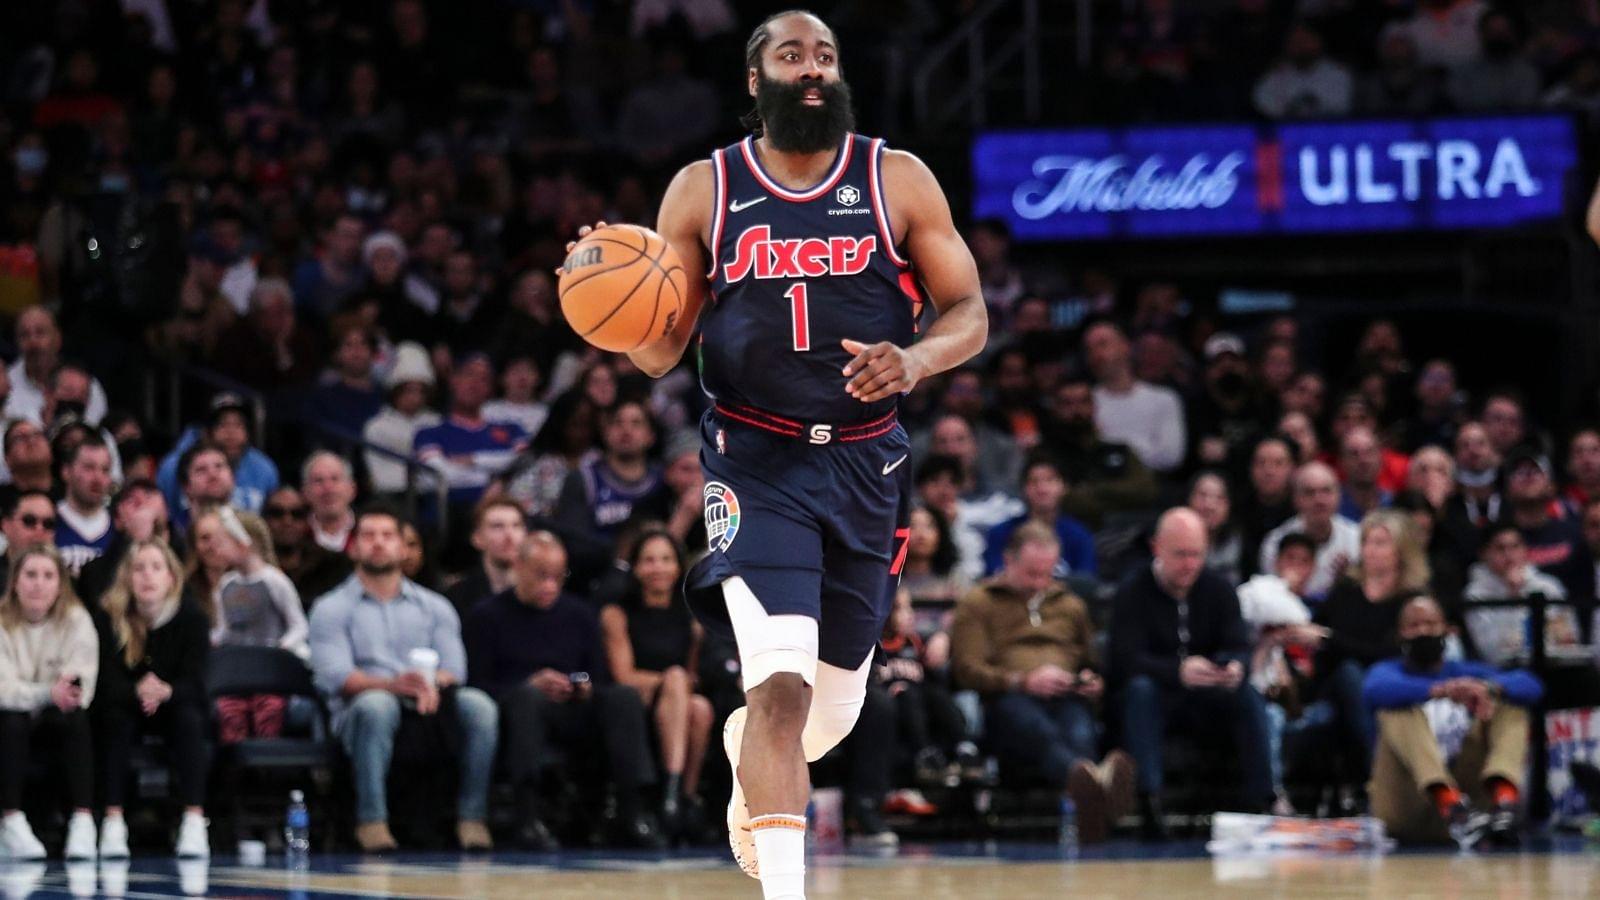 "I was not the same James Harden": The Beard spills the beans on his $15M pay cut 